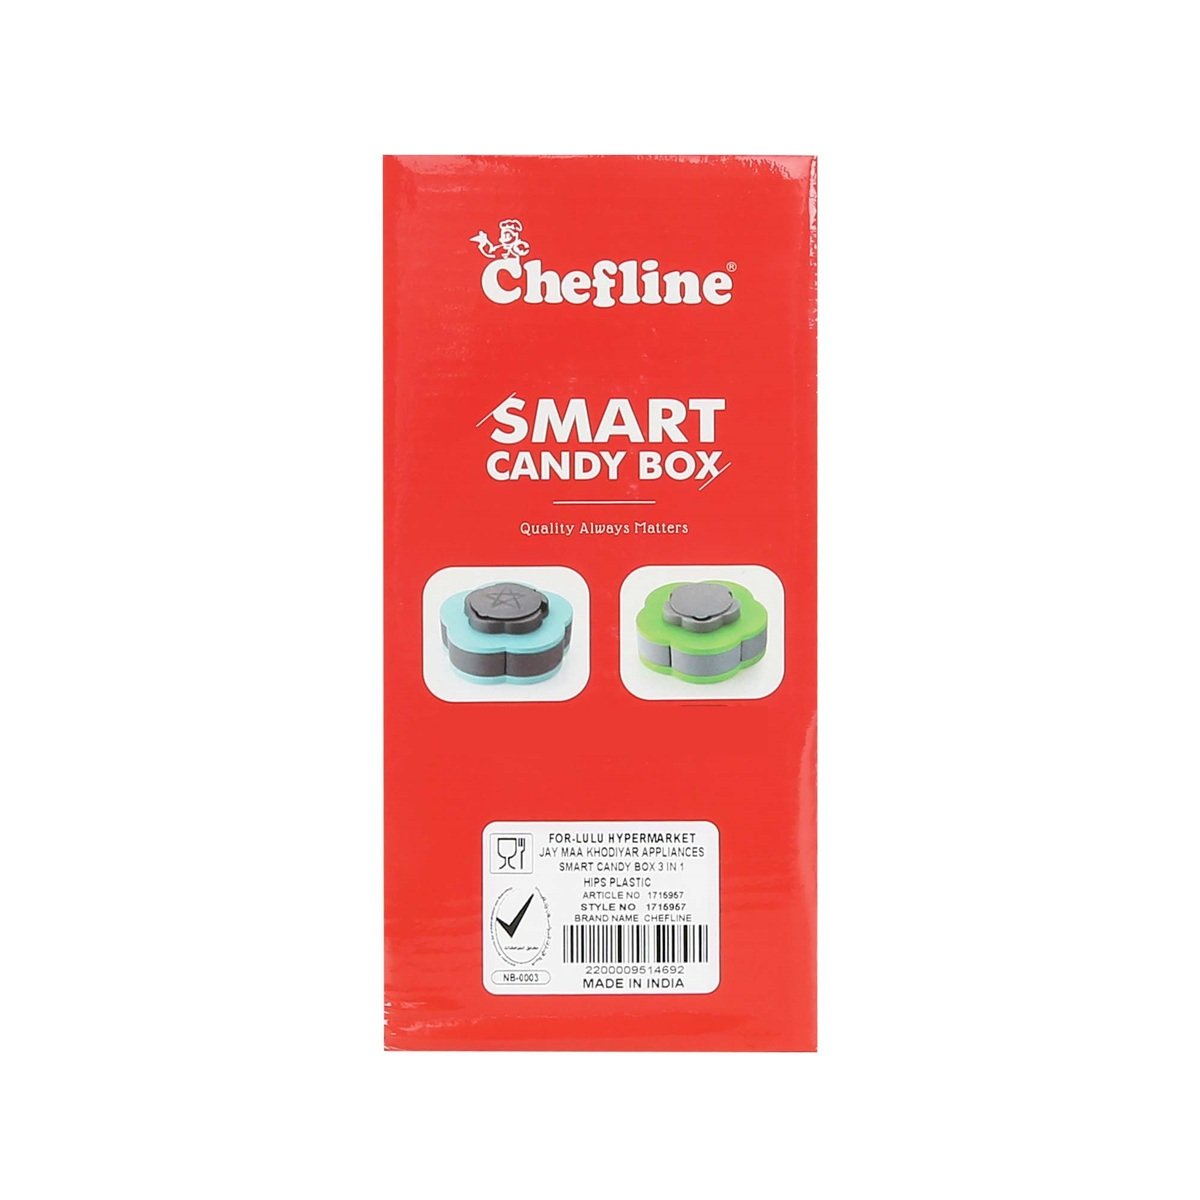 Chefline Smart Candy Box INDP5 Assorted Colors